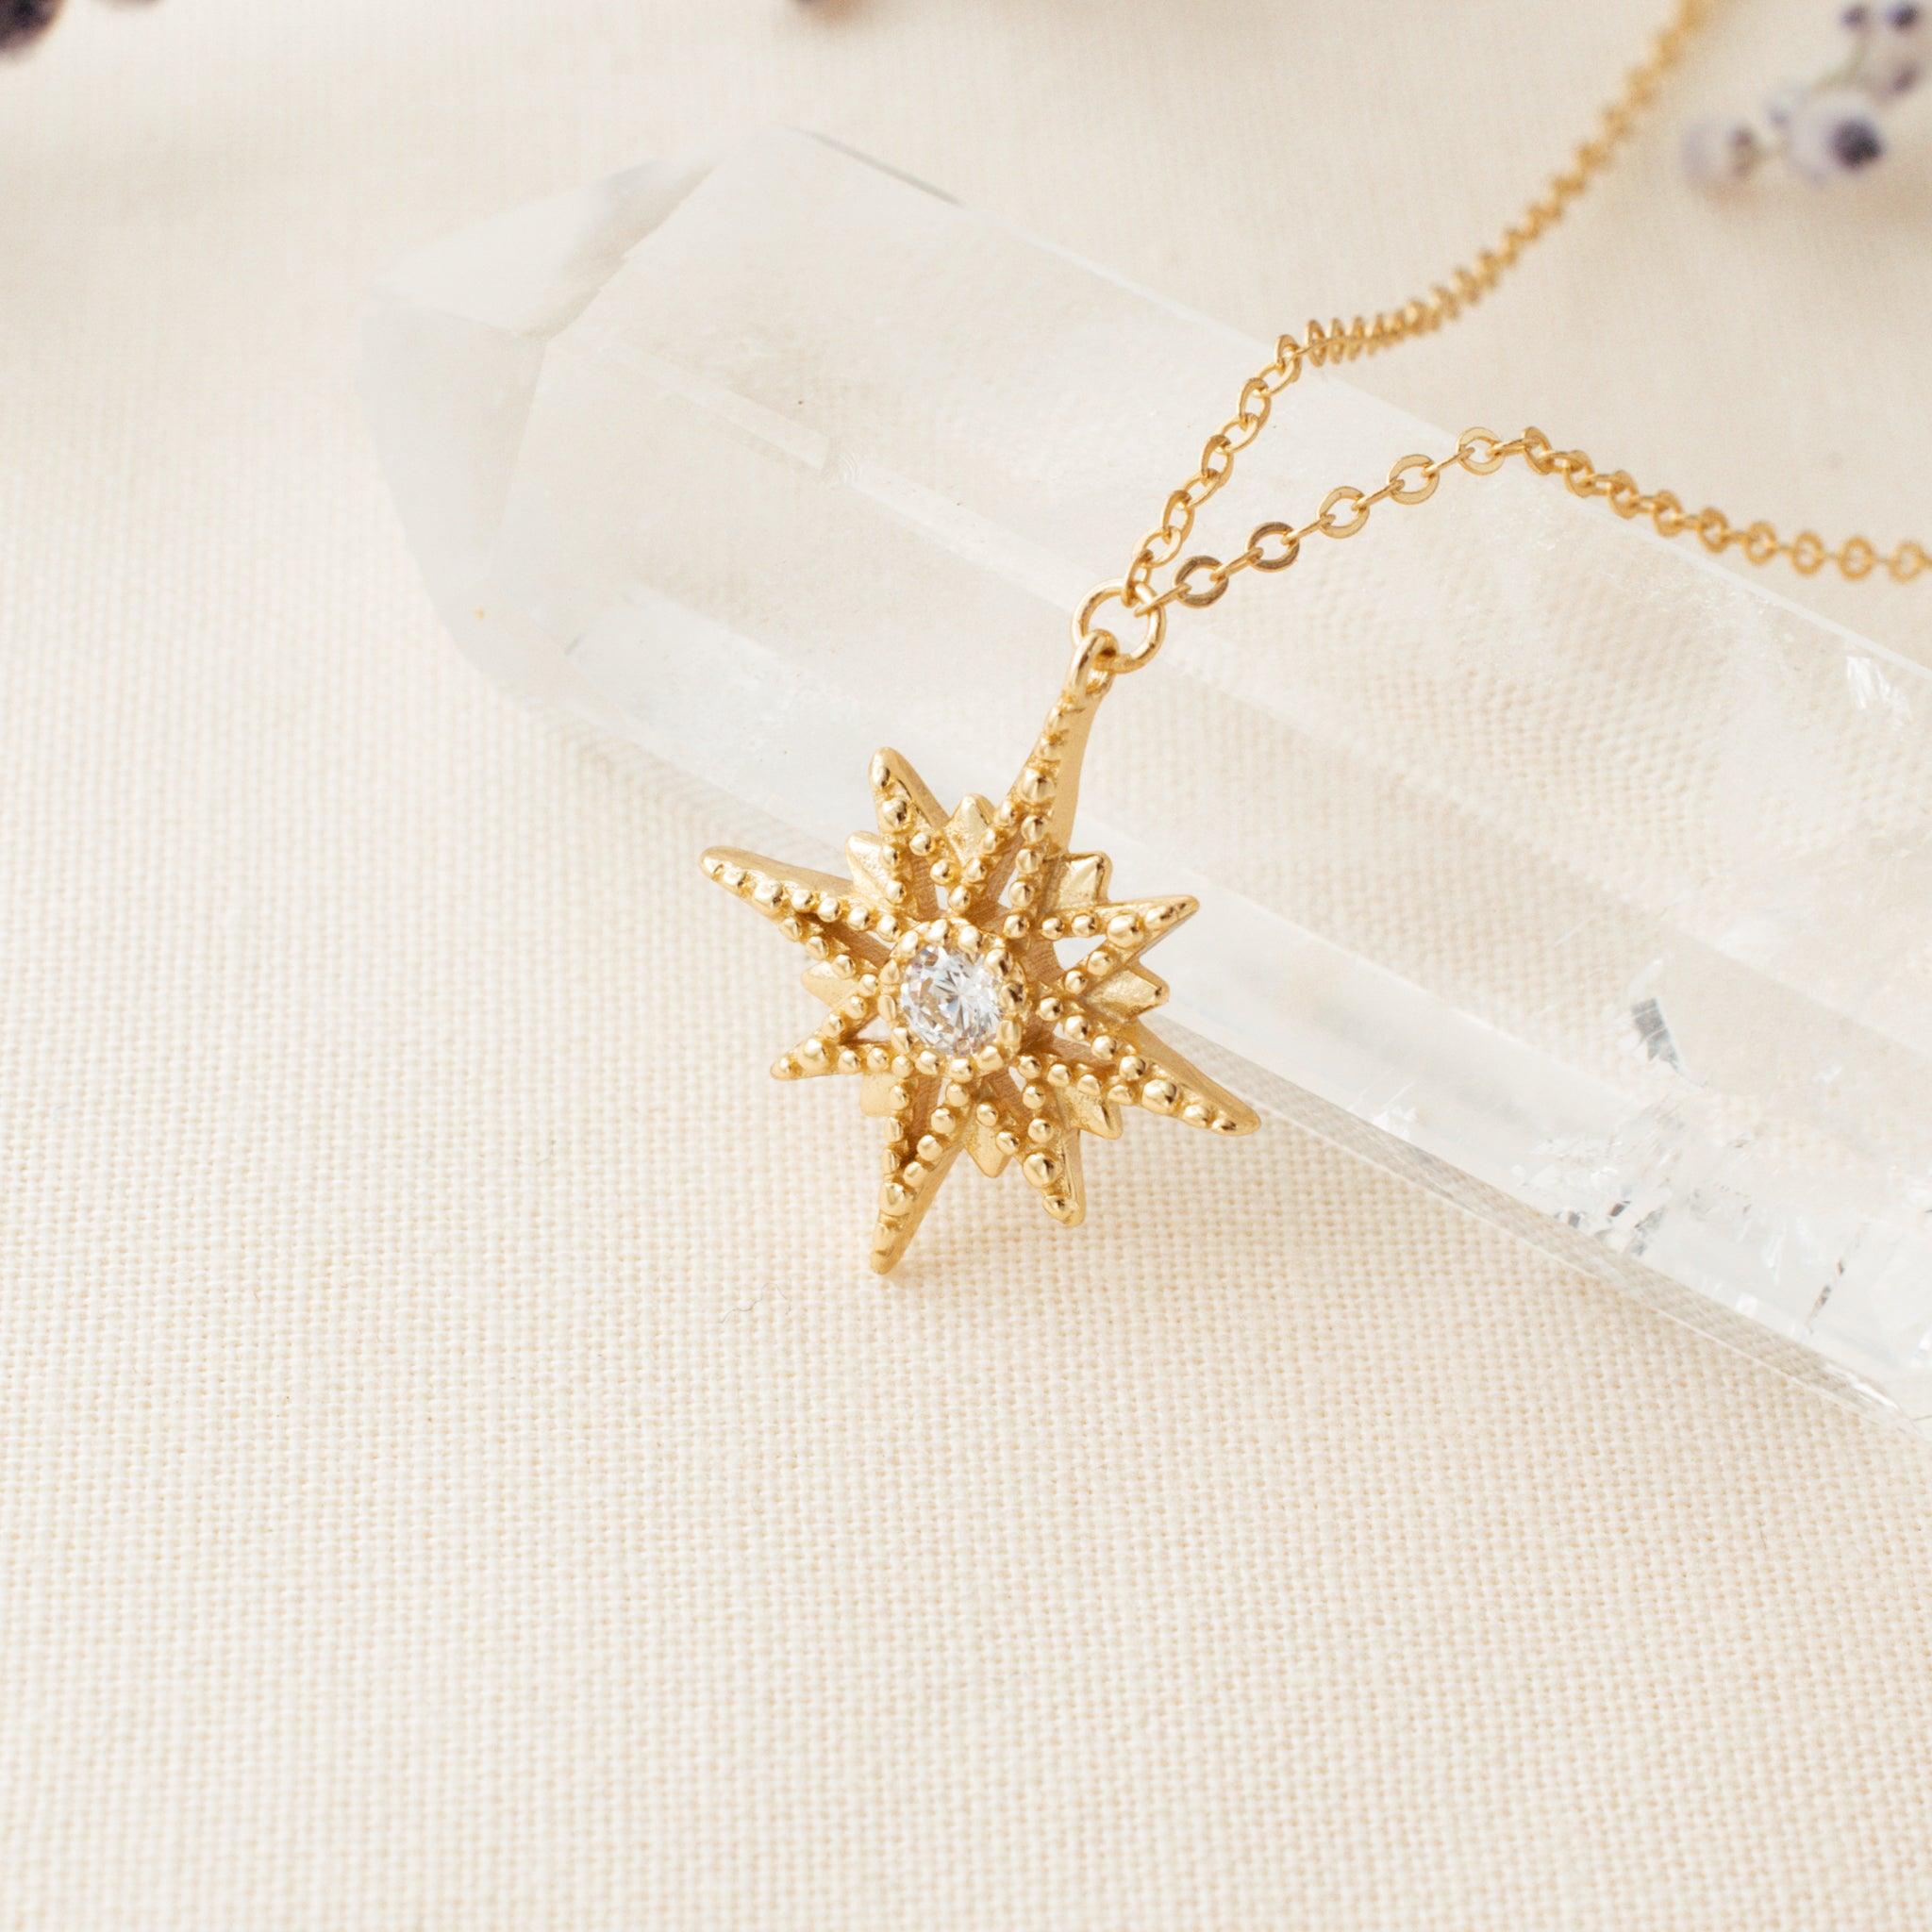 North Star Necklace by Avante Jewelry 